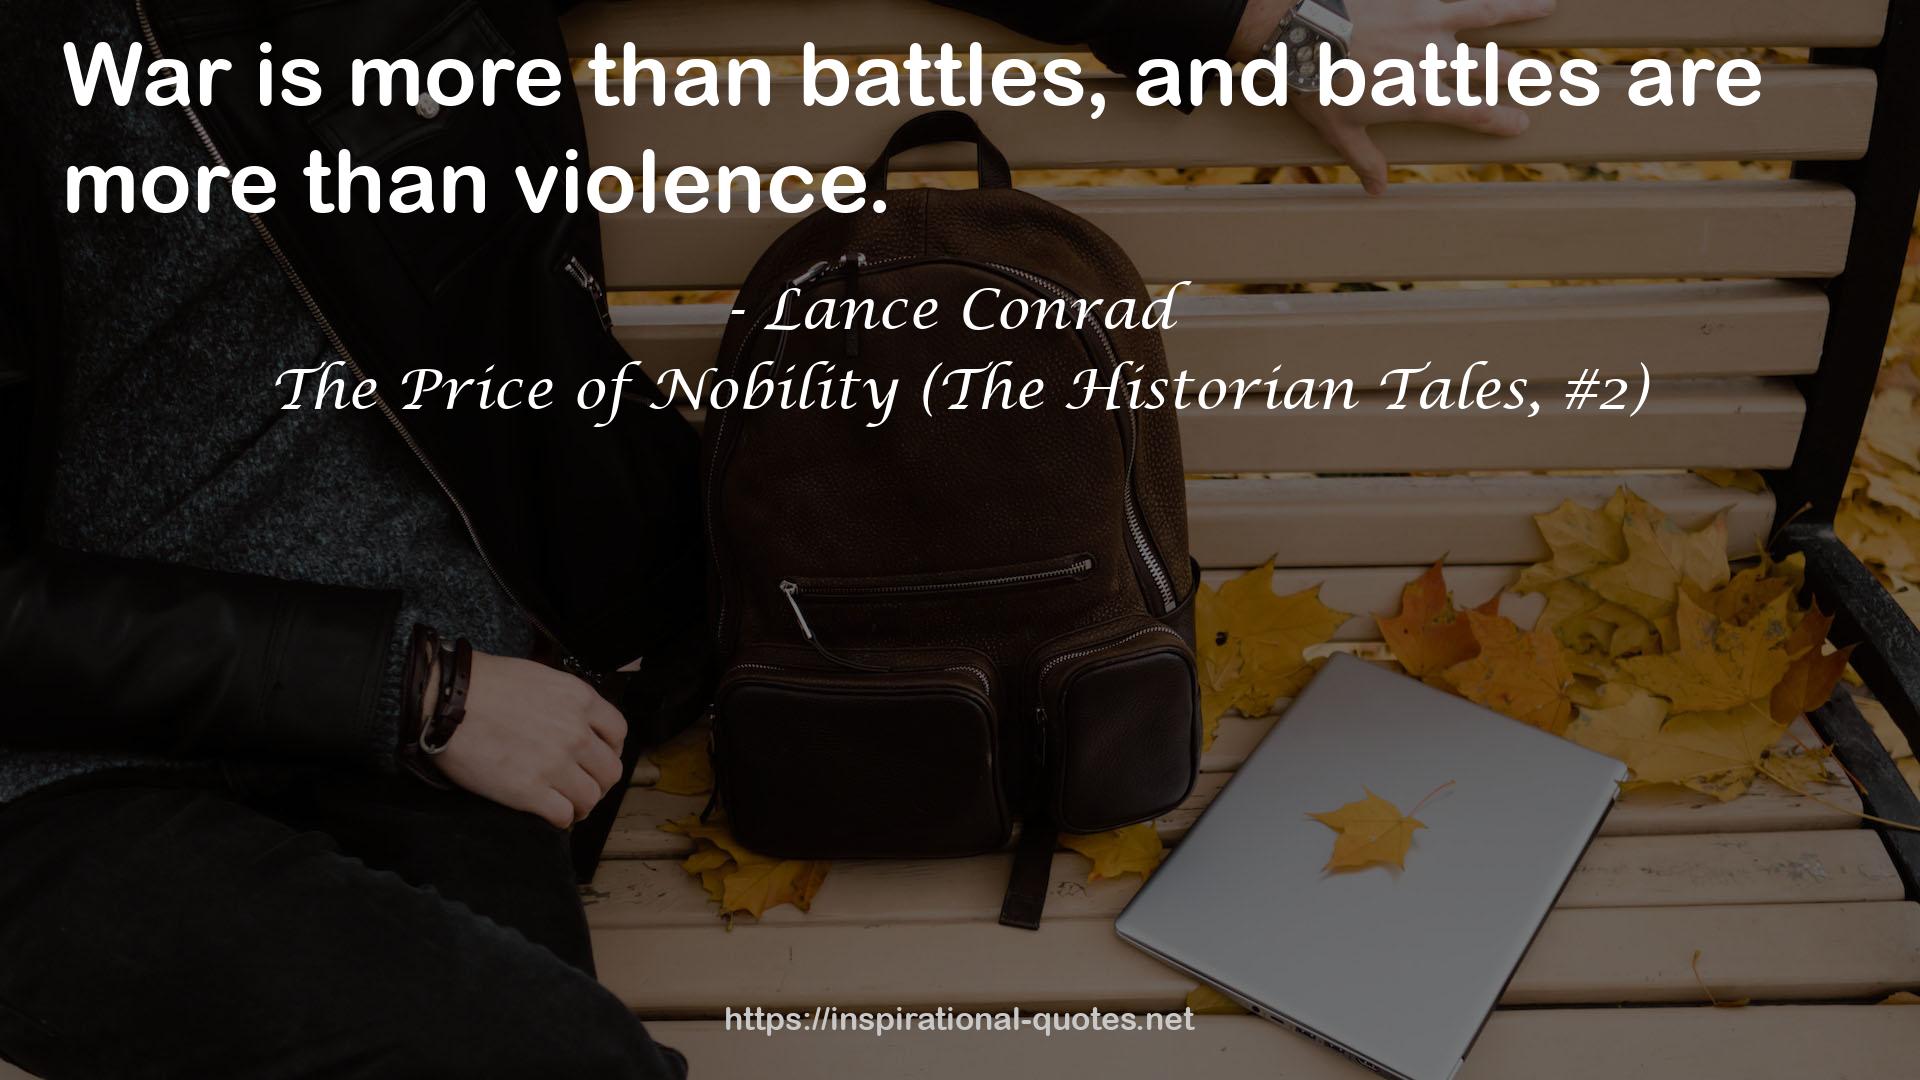 The Price of Nobility (The Historian Tales, #2) QUOTES